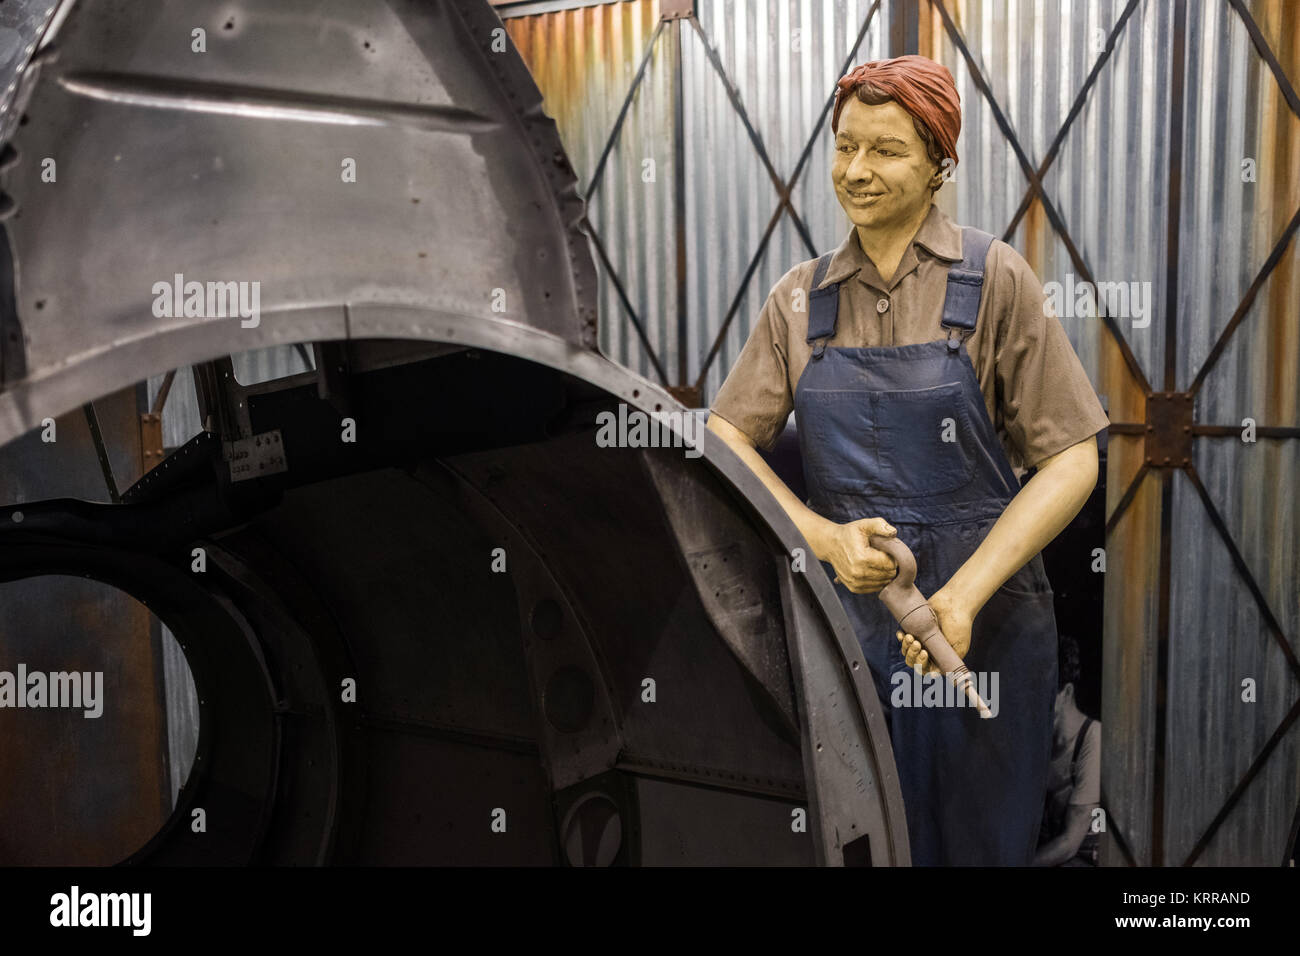 A life-size diorama depicting a Rosie the Riveter working during World War II as part of an exhibit on the Second World War at the Smithsonian National Museum of American History in Washington DC. Stock Photo